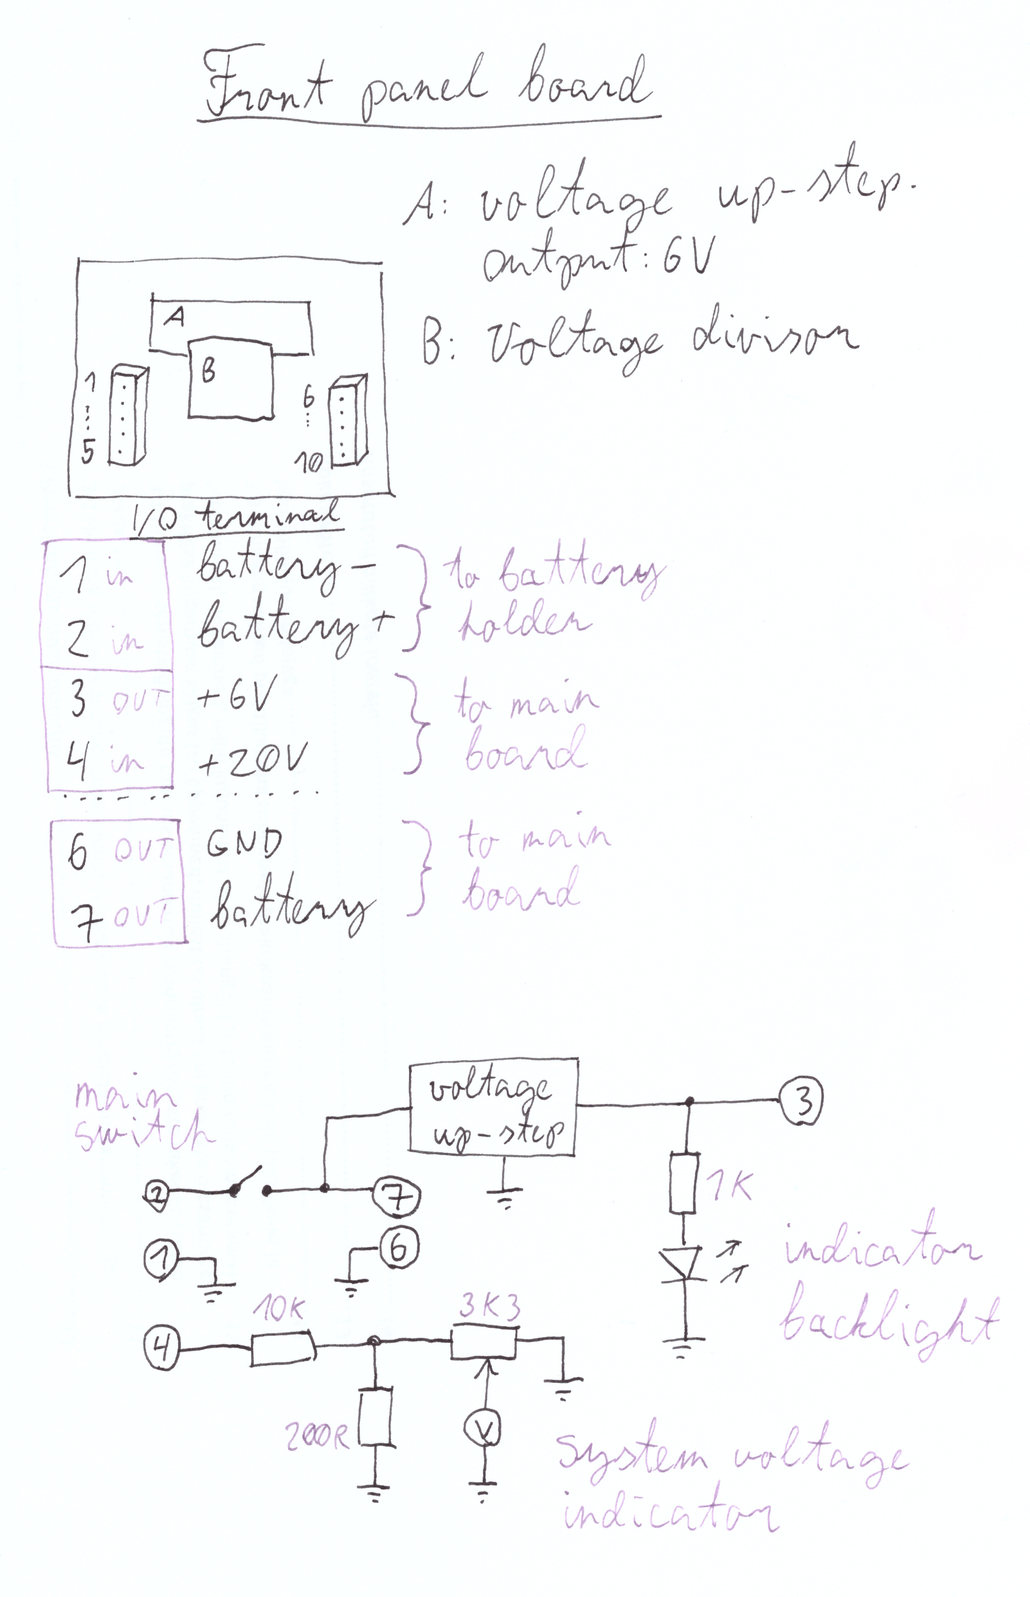 misc/Portable stereo active speaker/front panel/schematic.png